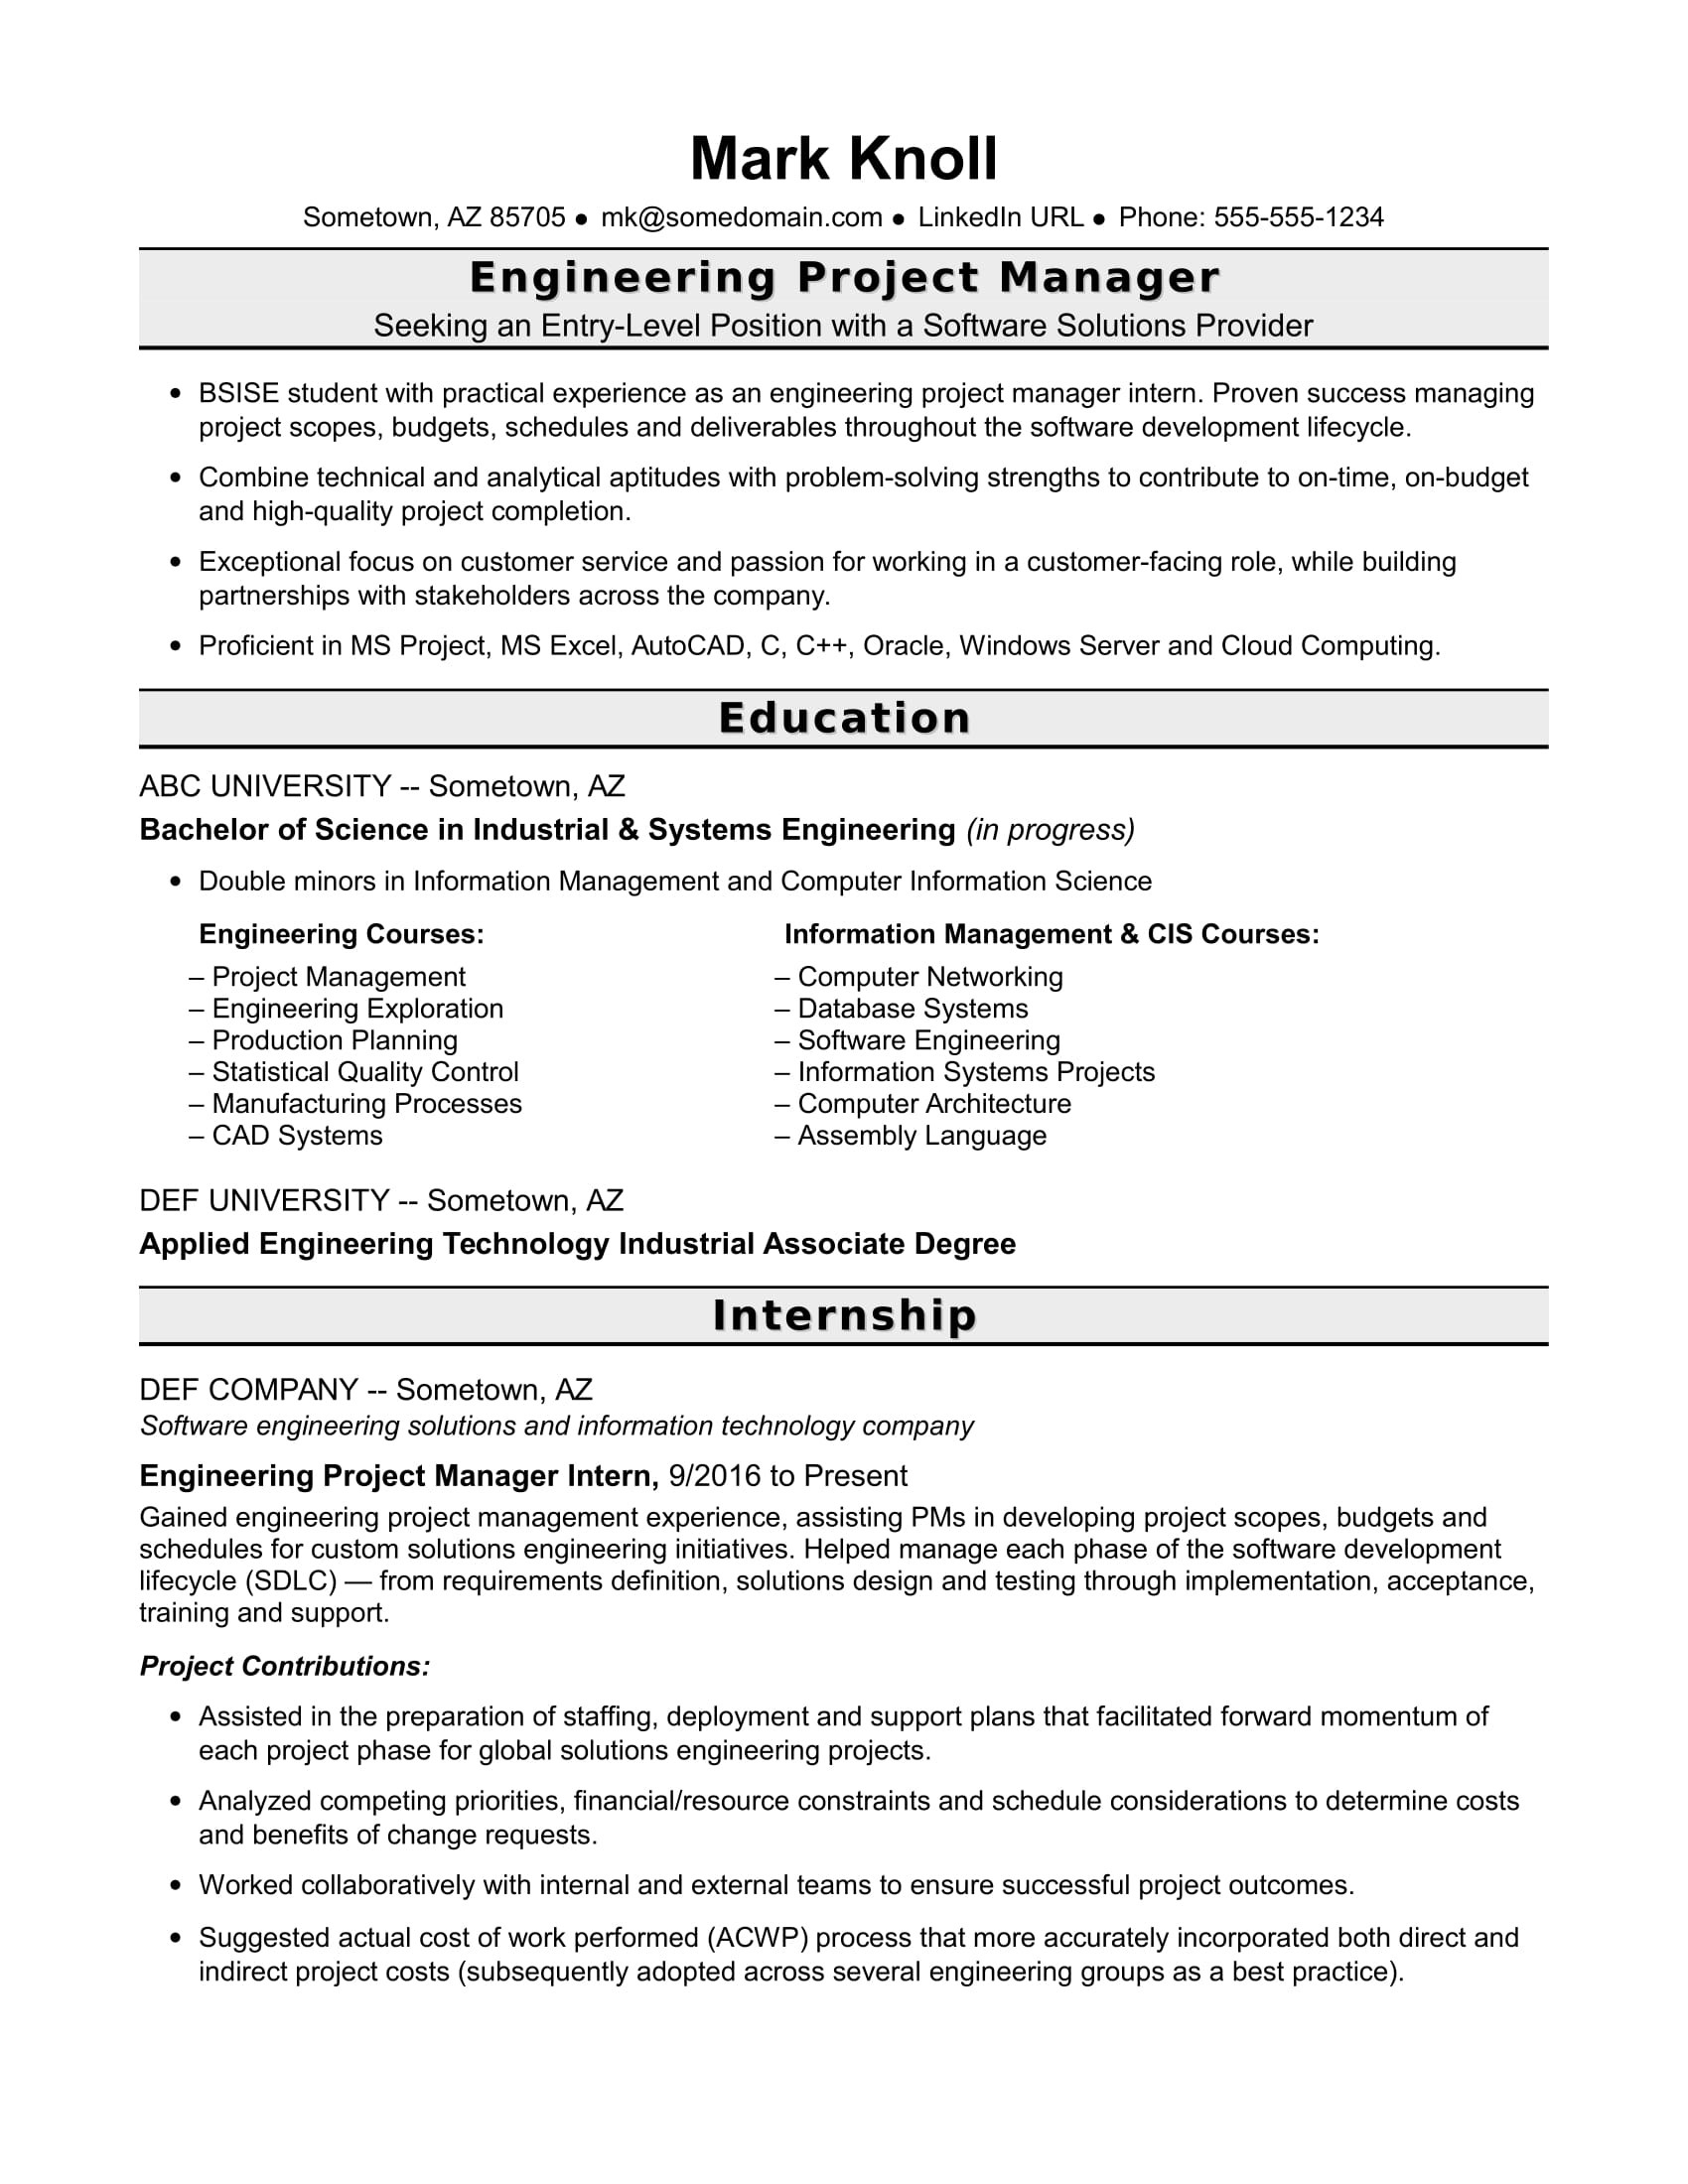 Sample Resume for Project Manager Civil Entry-level Project Manager Resume for Engineers Monster.com